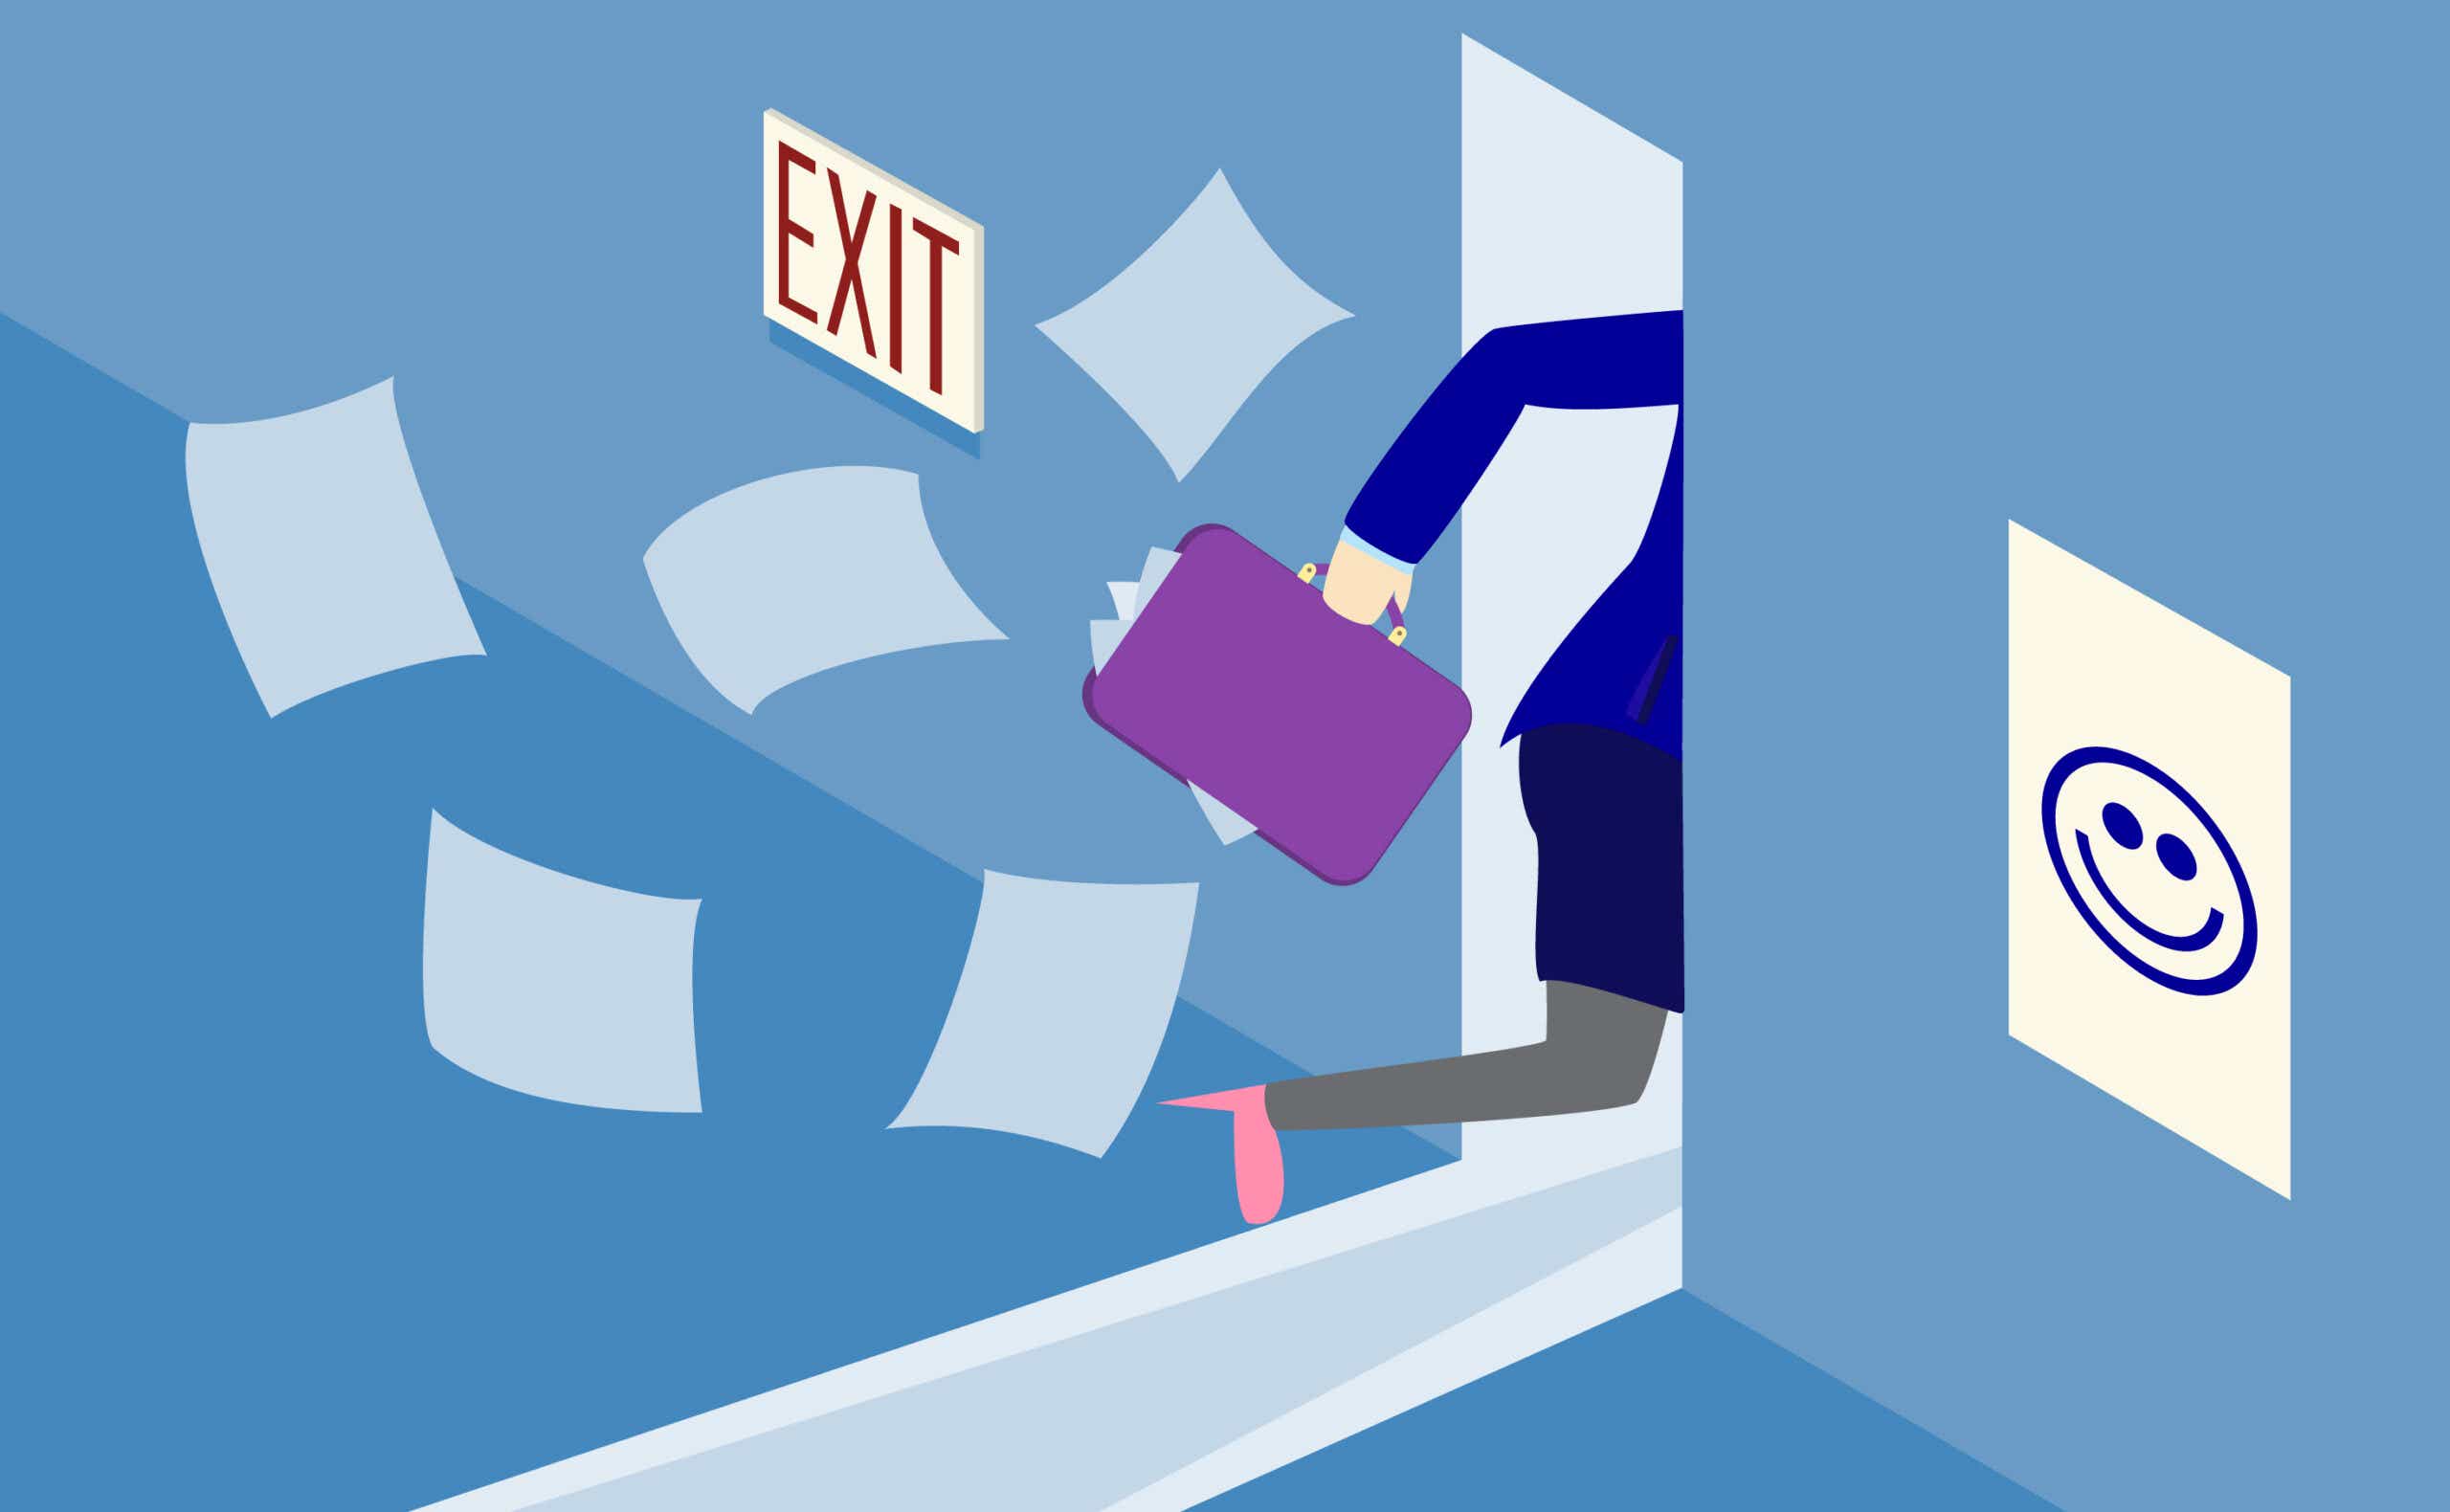 Illustration of a woman with a briefcase walking through an exit door